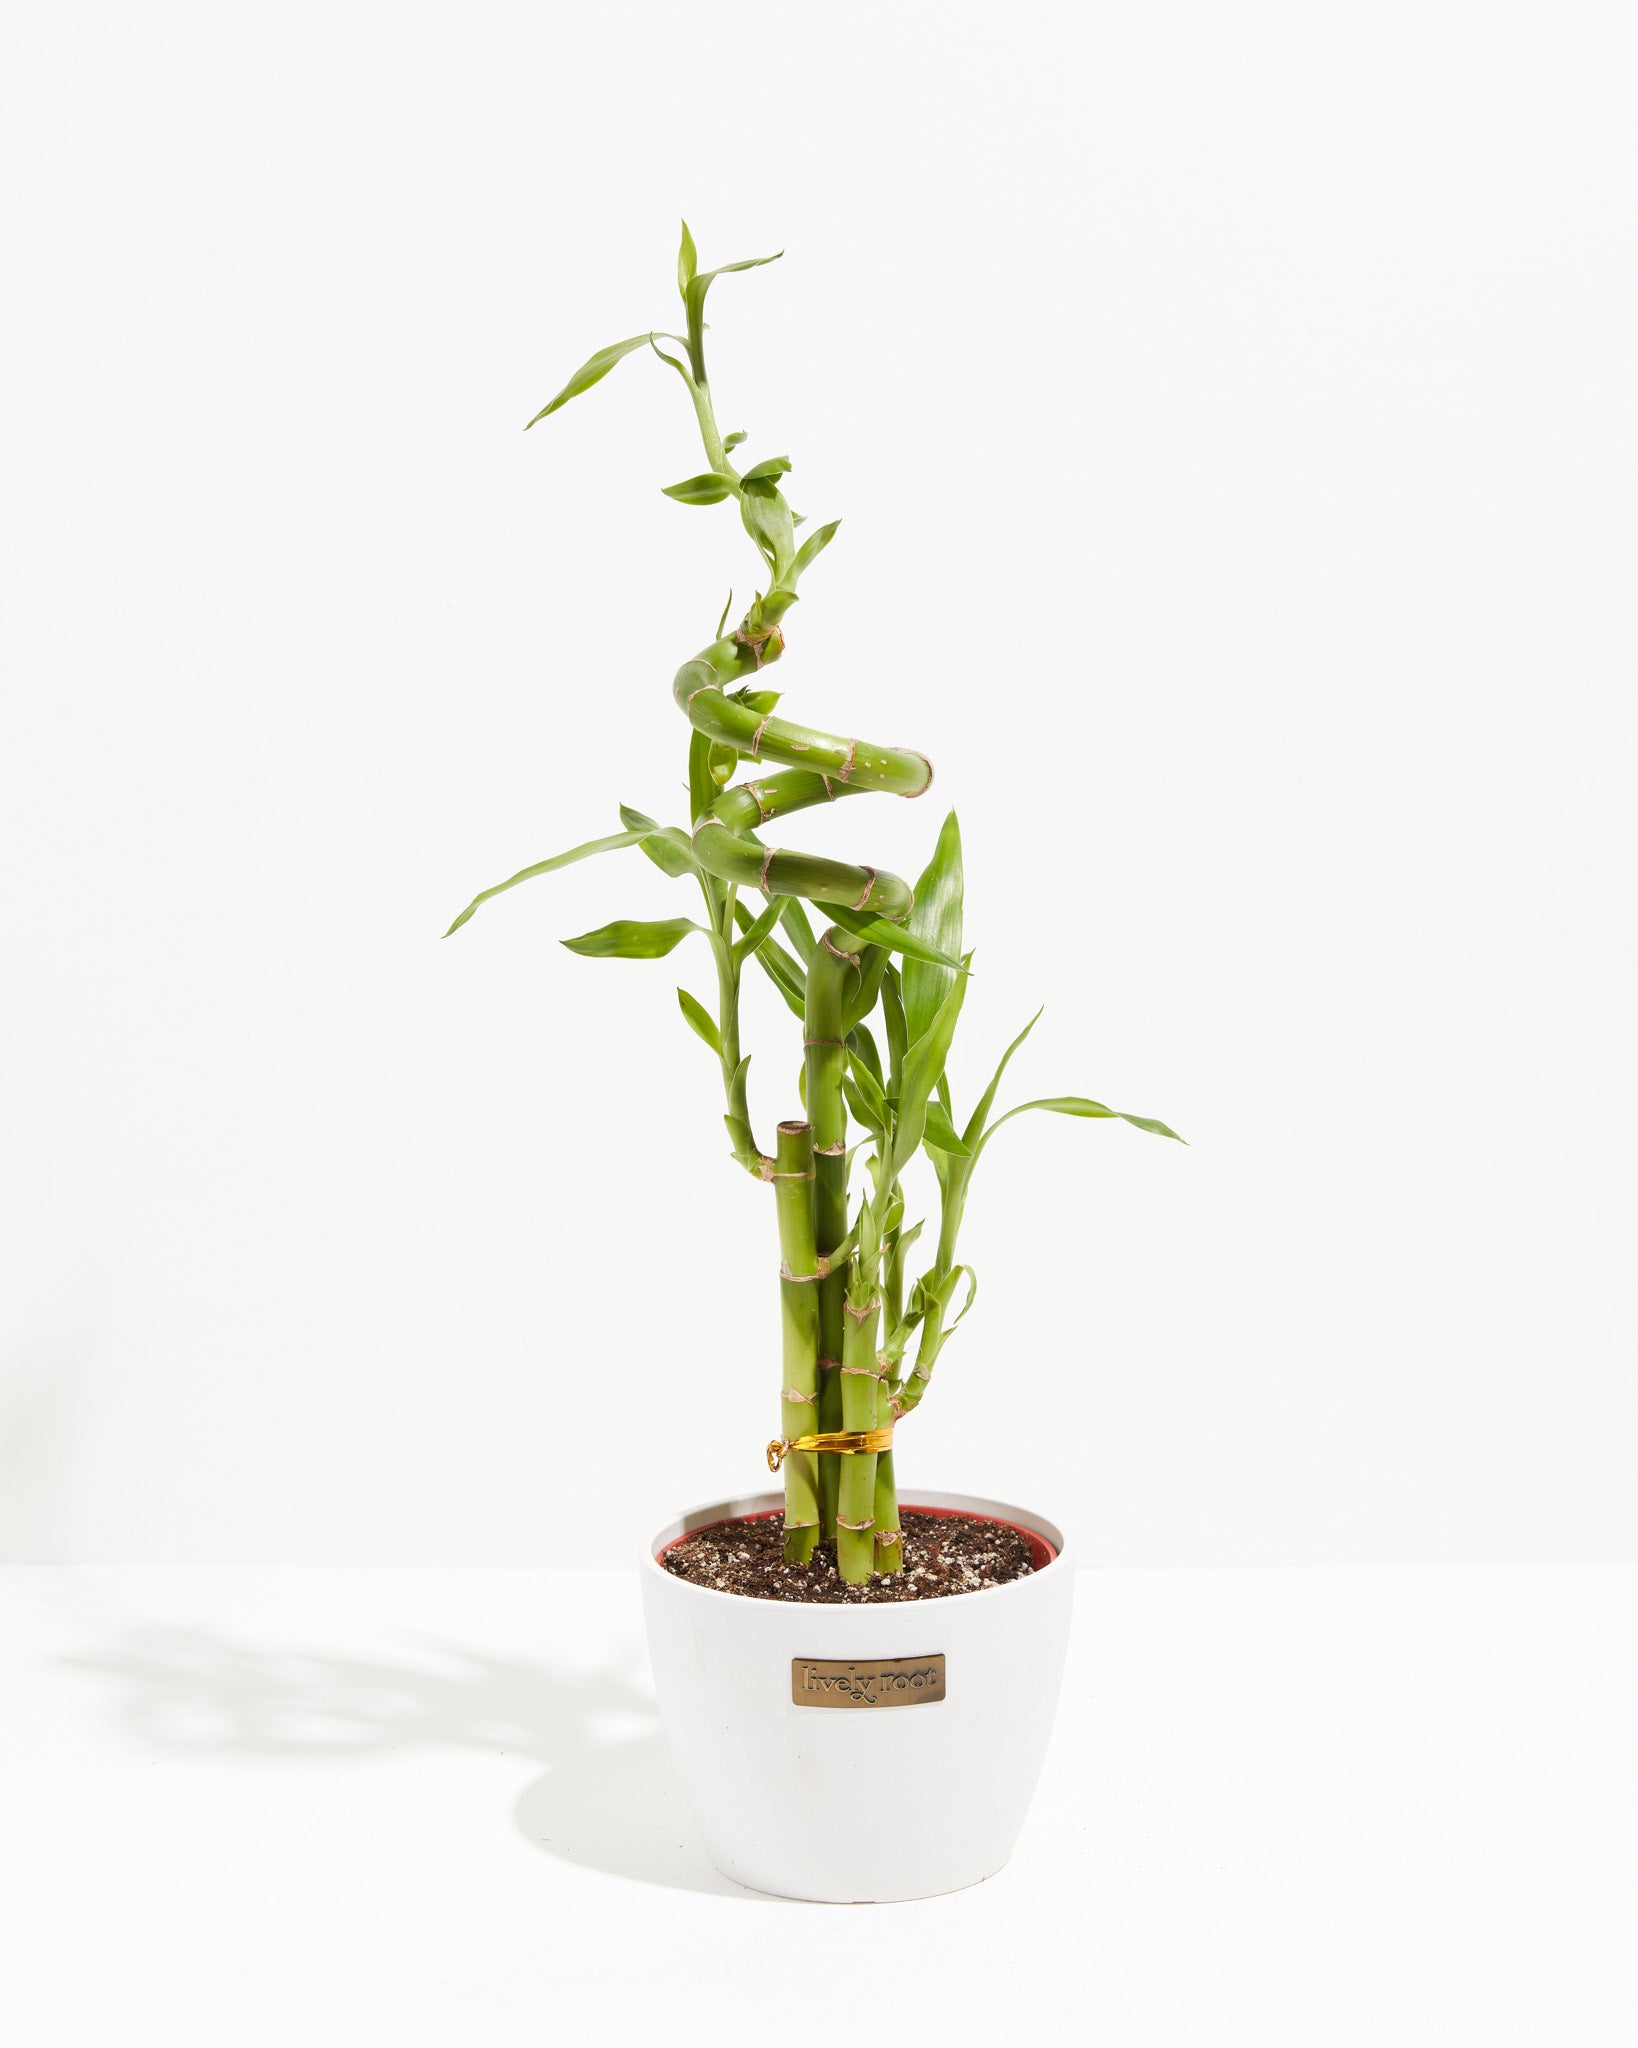 Lucky Bamboo Stalks, Lucky Bamboo Arrangements and Accessories